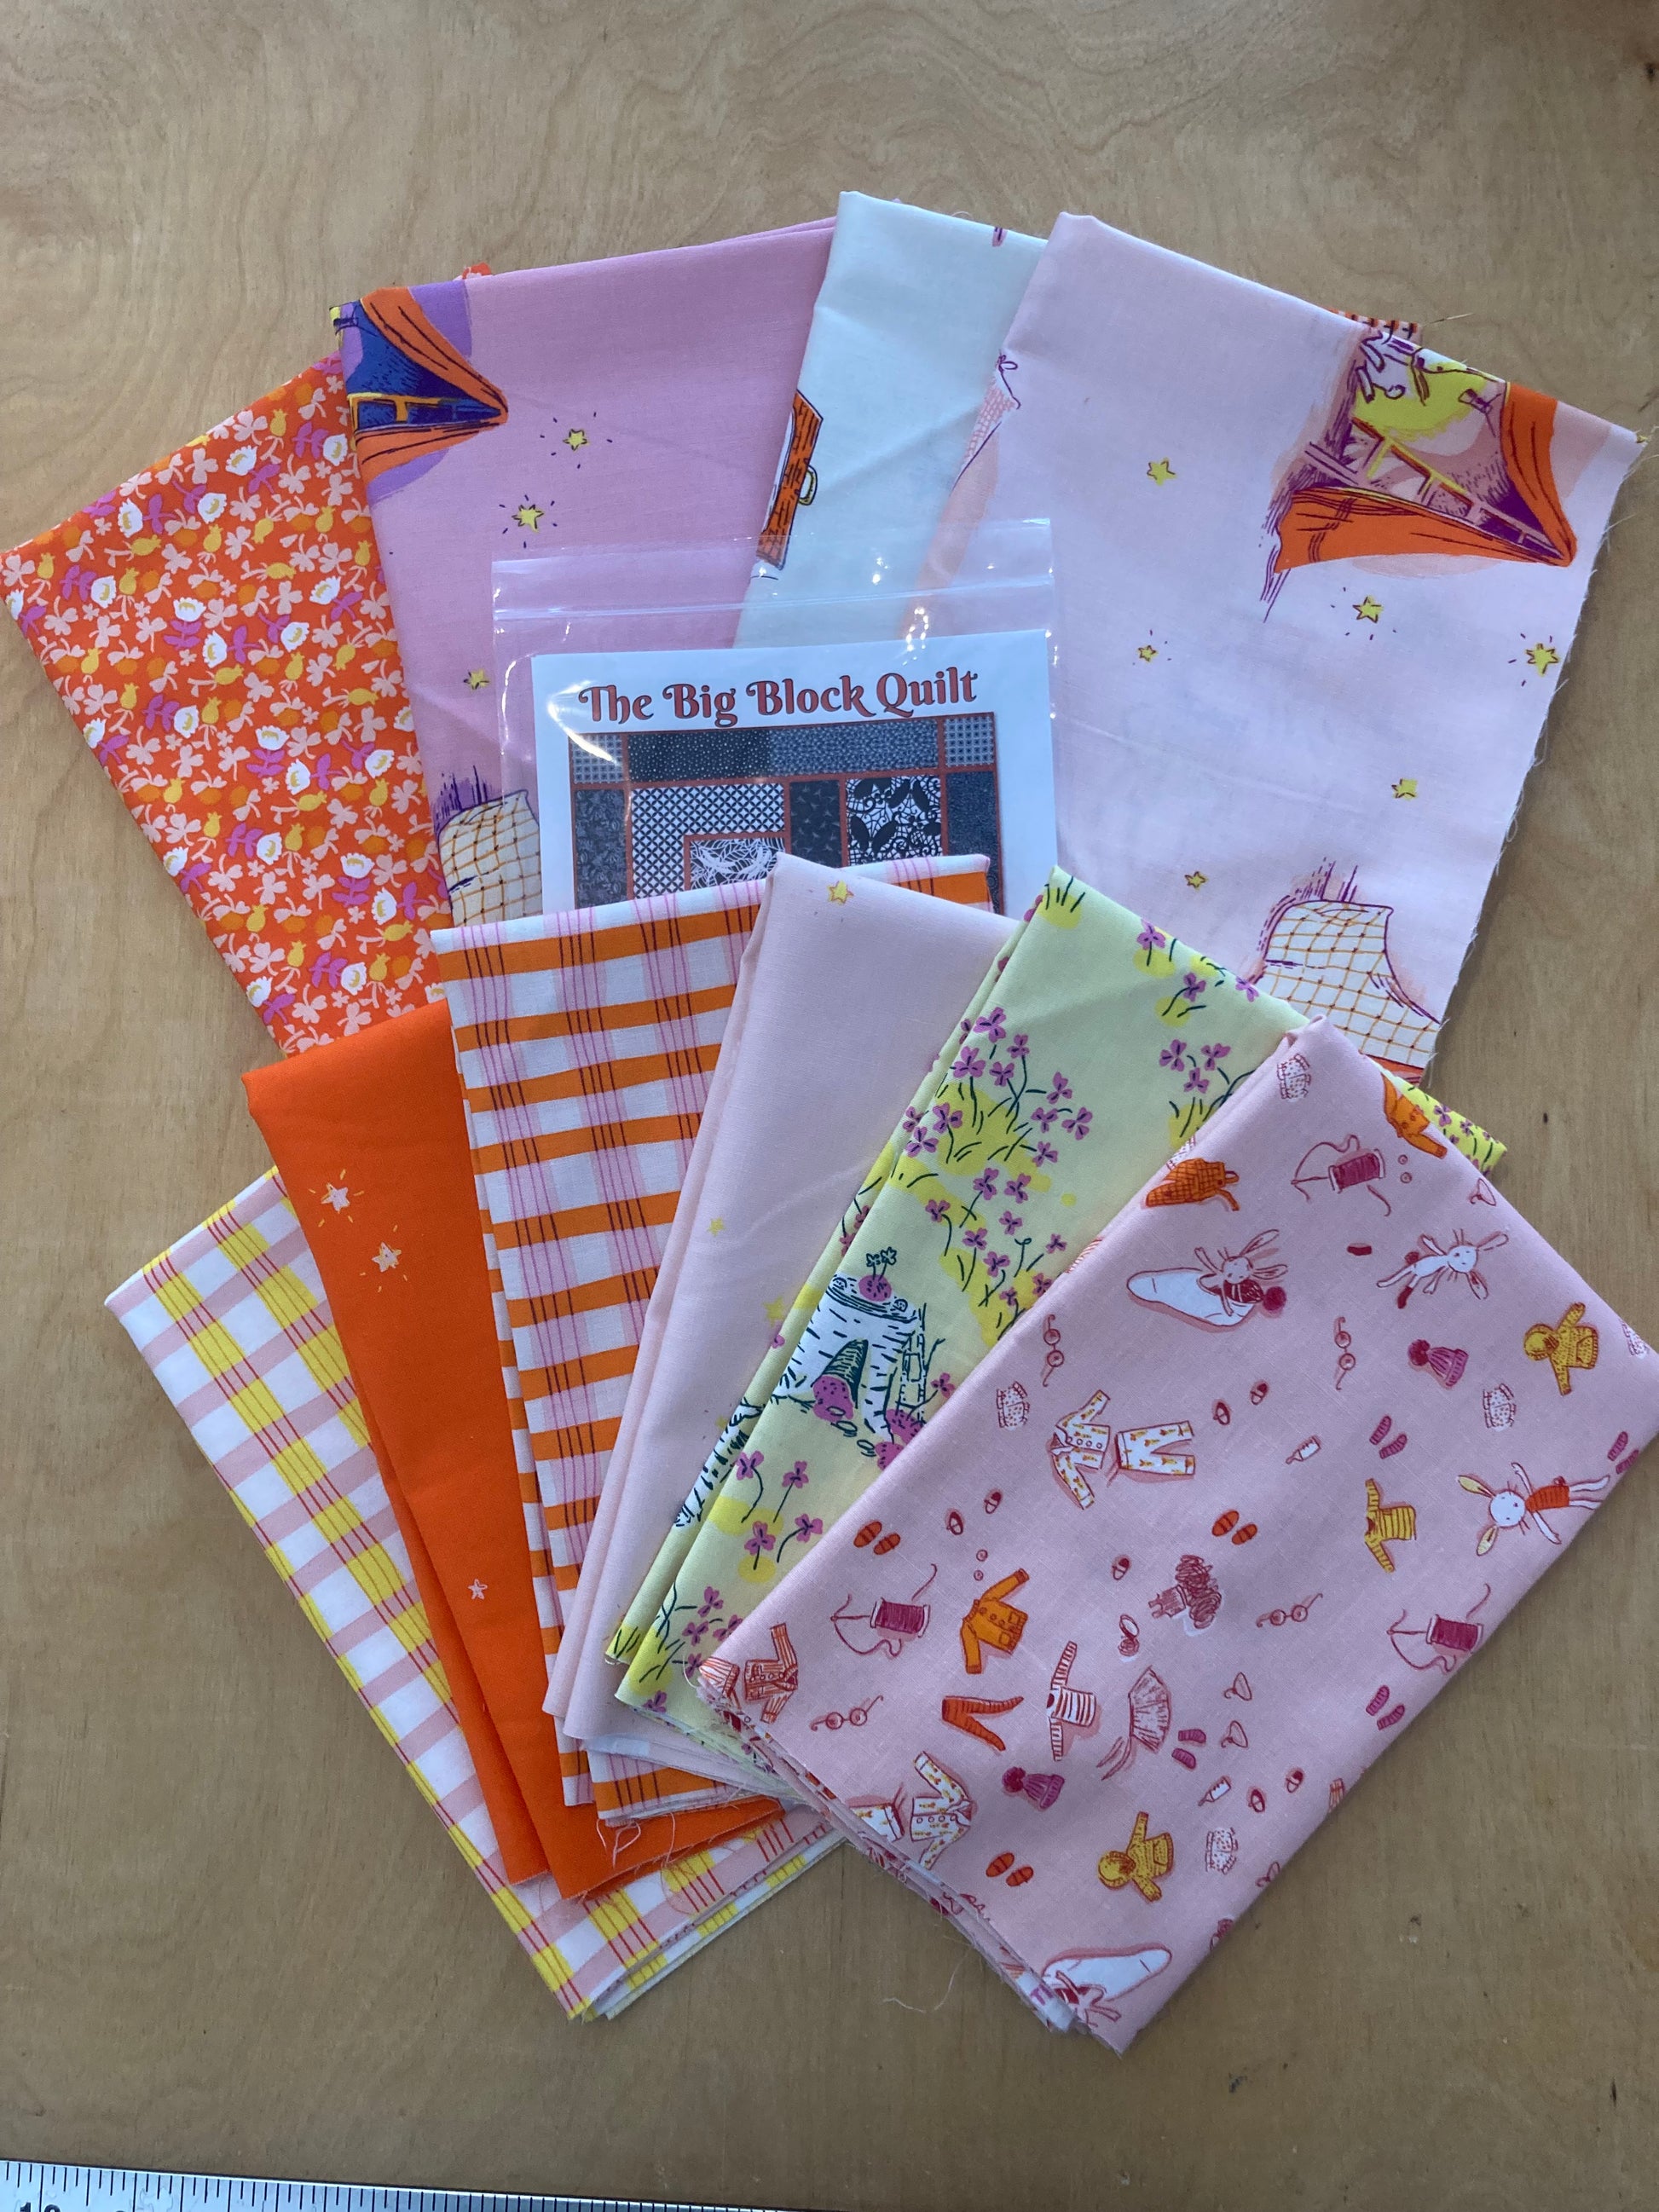 precut fabric in pink, yellow and orange with a quilt pattern